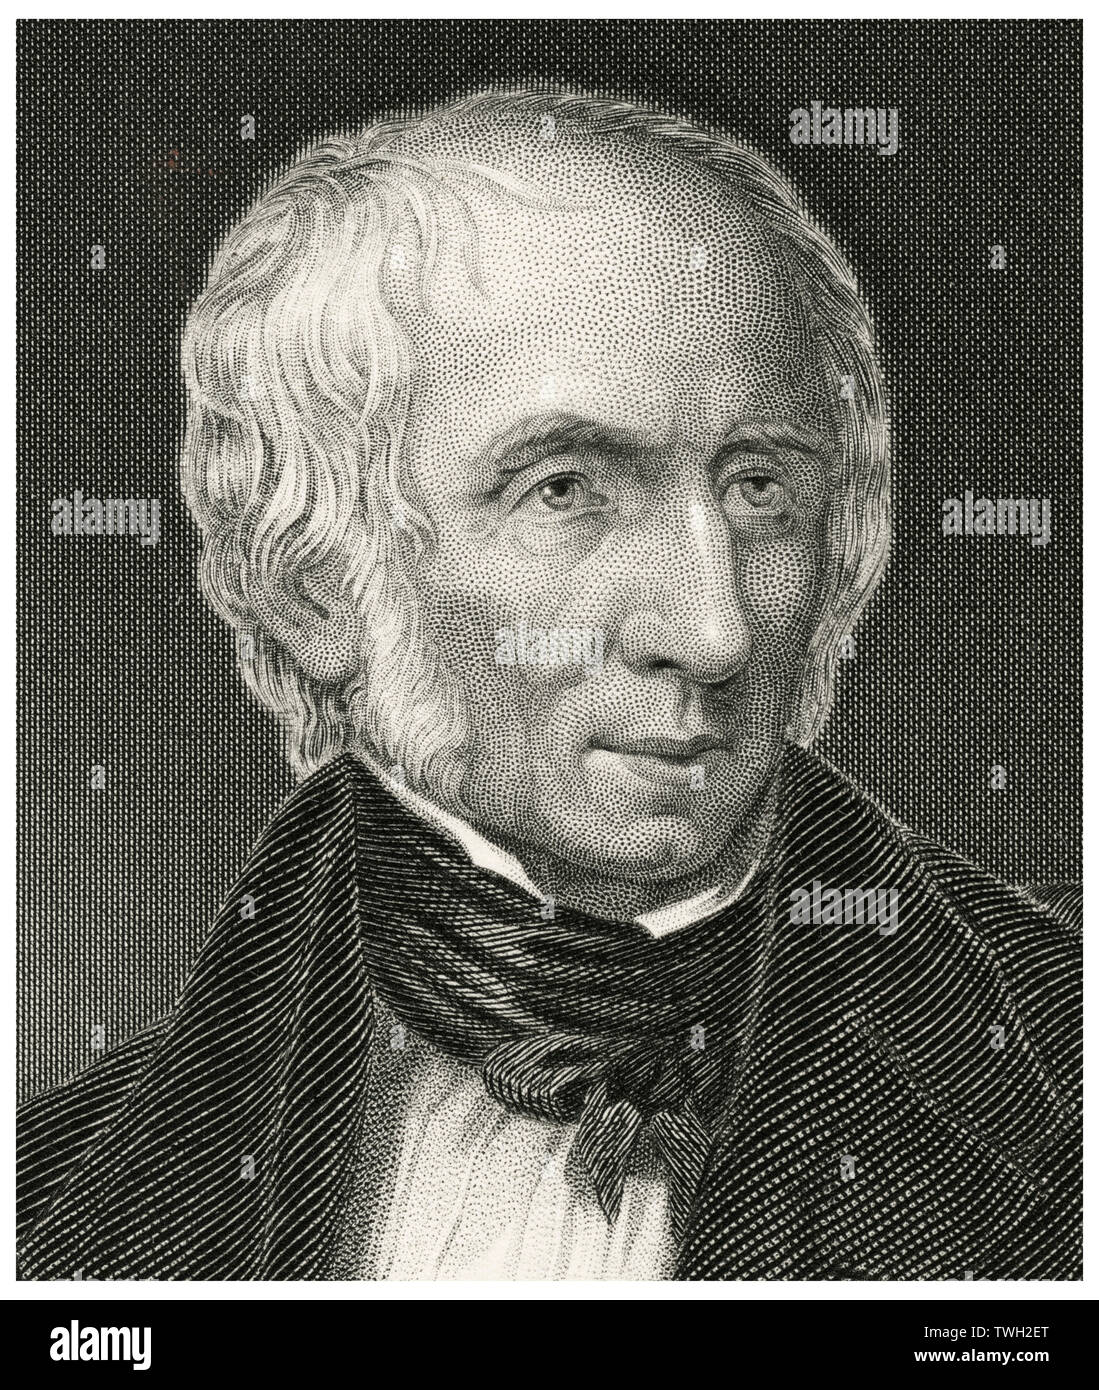 William Wordsworth (1770-1850), English Romantic Poet, Head and Shoulders Portrait, Steel Engraving, Portrait Gallery of Eminent Men and Women of Europe and America by Evert A. Duyckinck, Published by Henry J. Johnson, Johnson, Wilson & Company, New York, 1873 Stock Photo